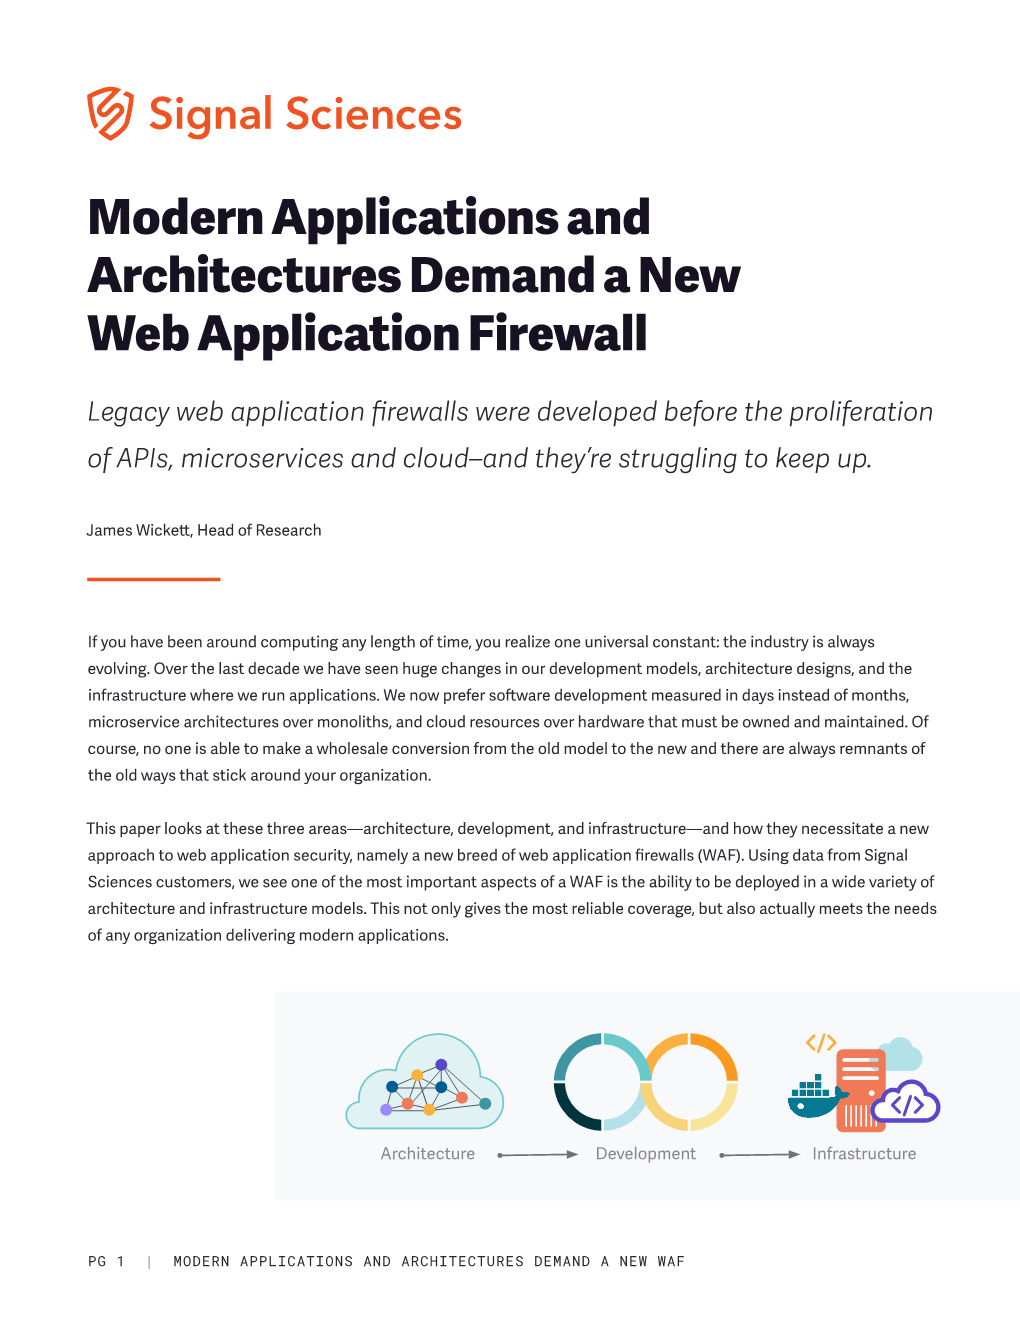 Modern Applications and Architectures Demand a New Web Application Firewall